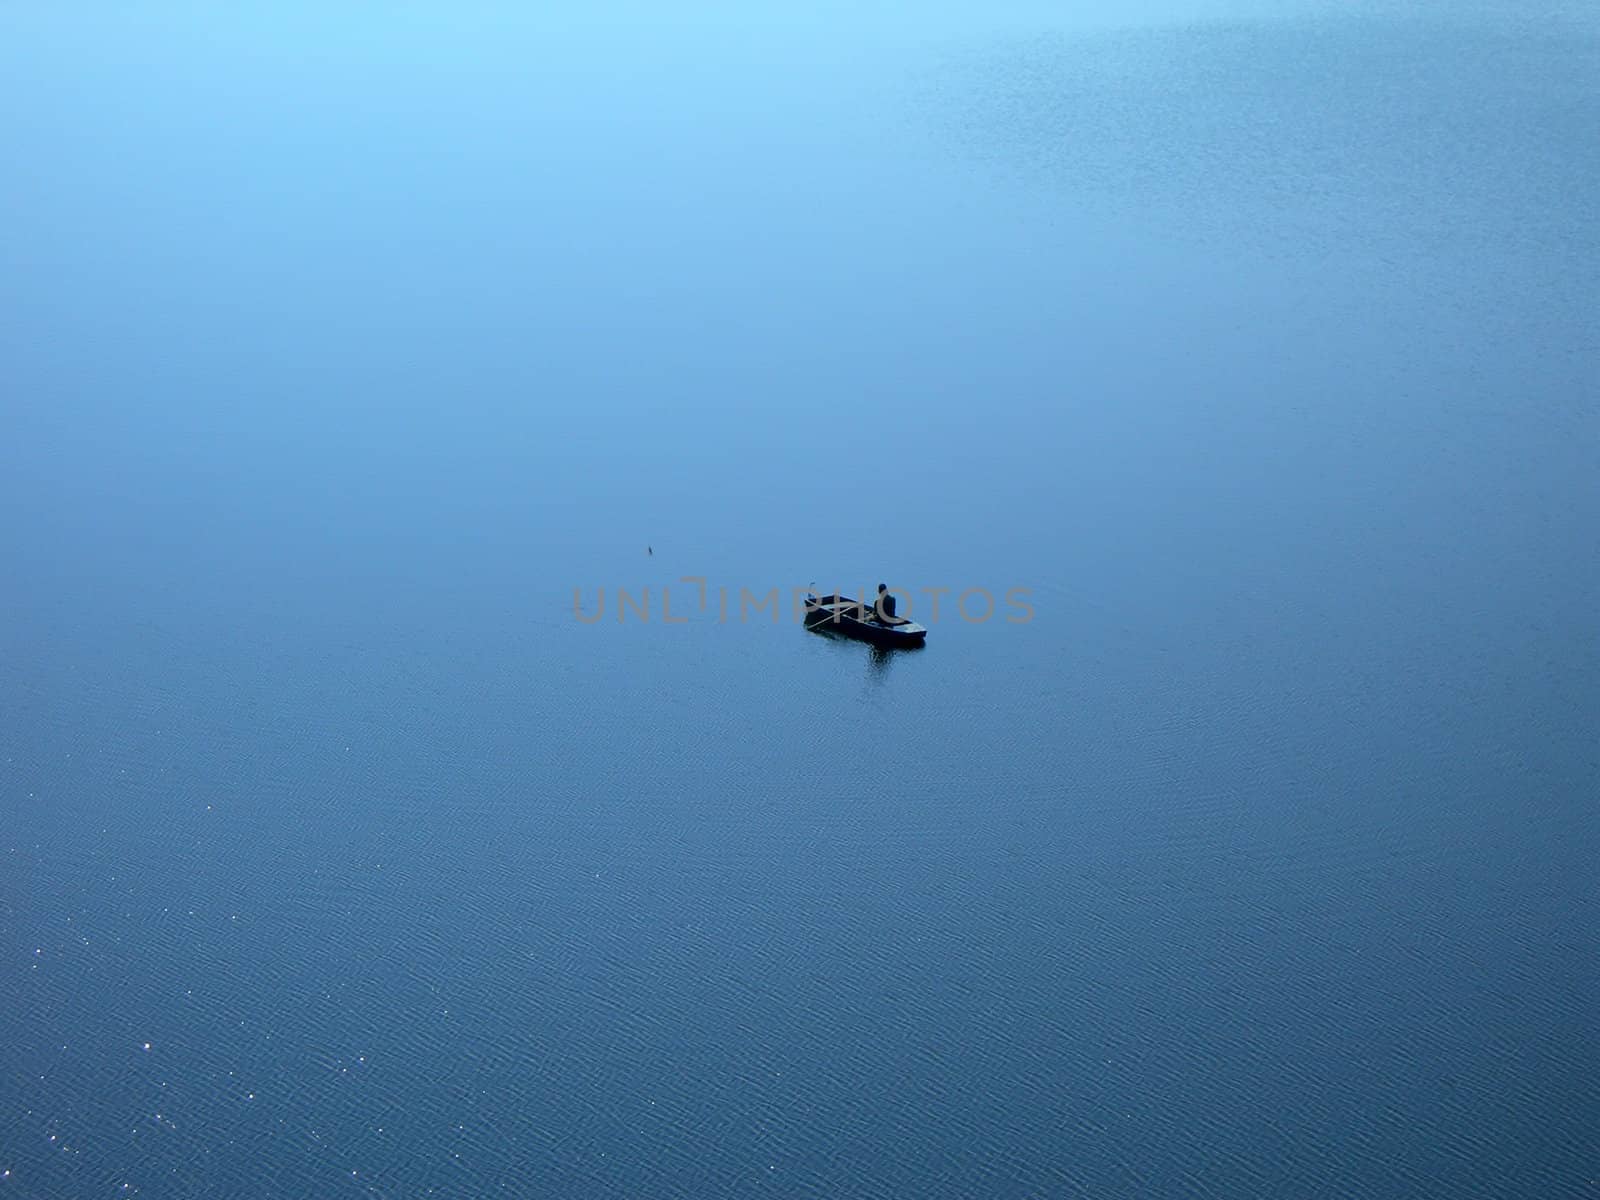  Lonely fishermen surrounded by endless water